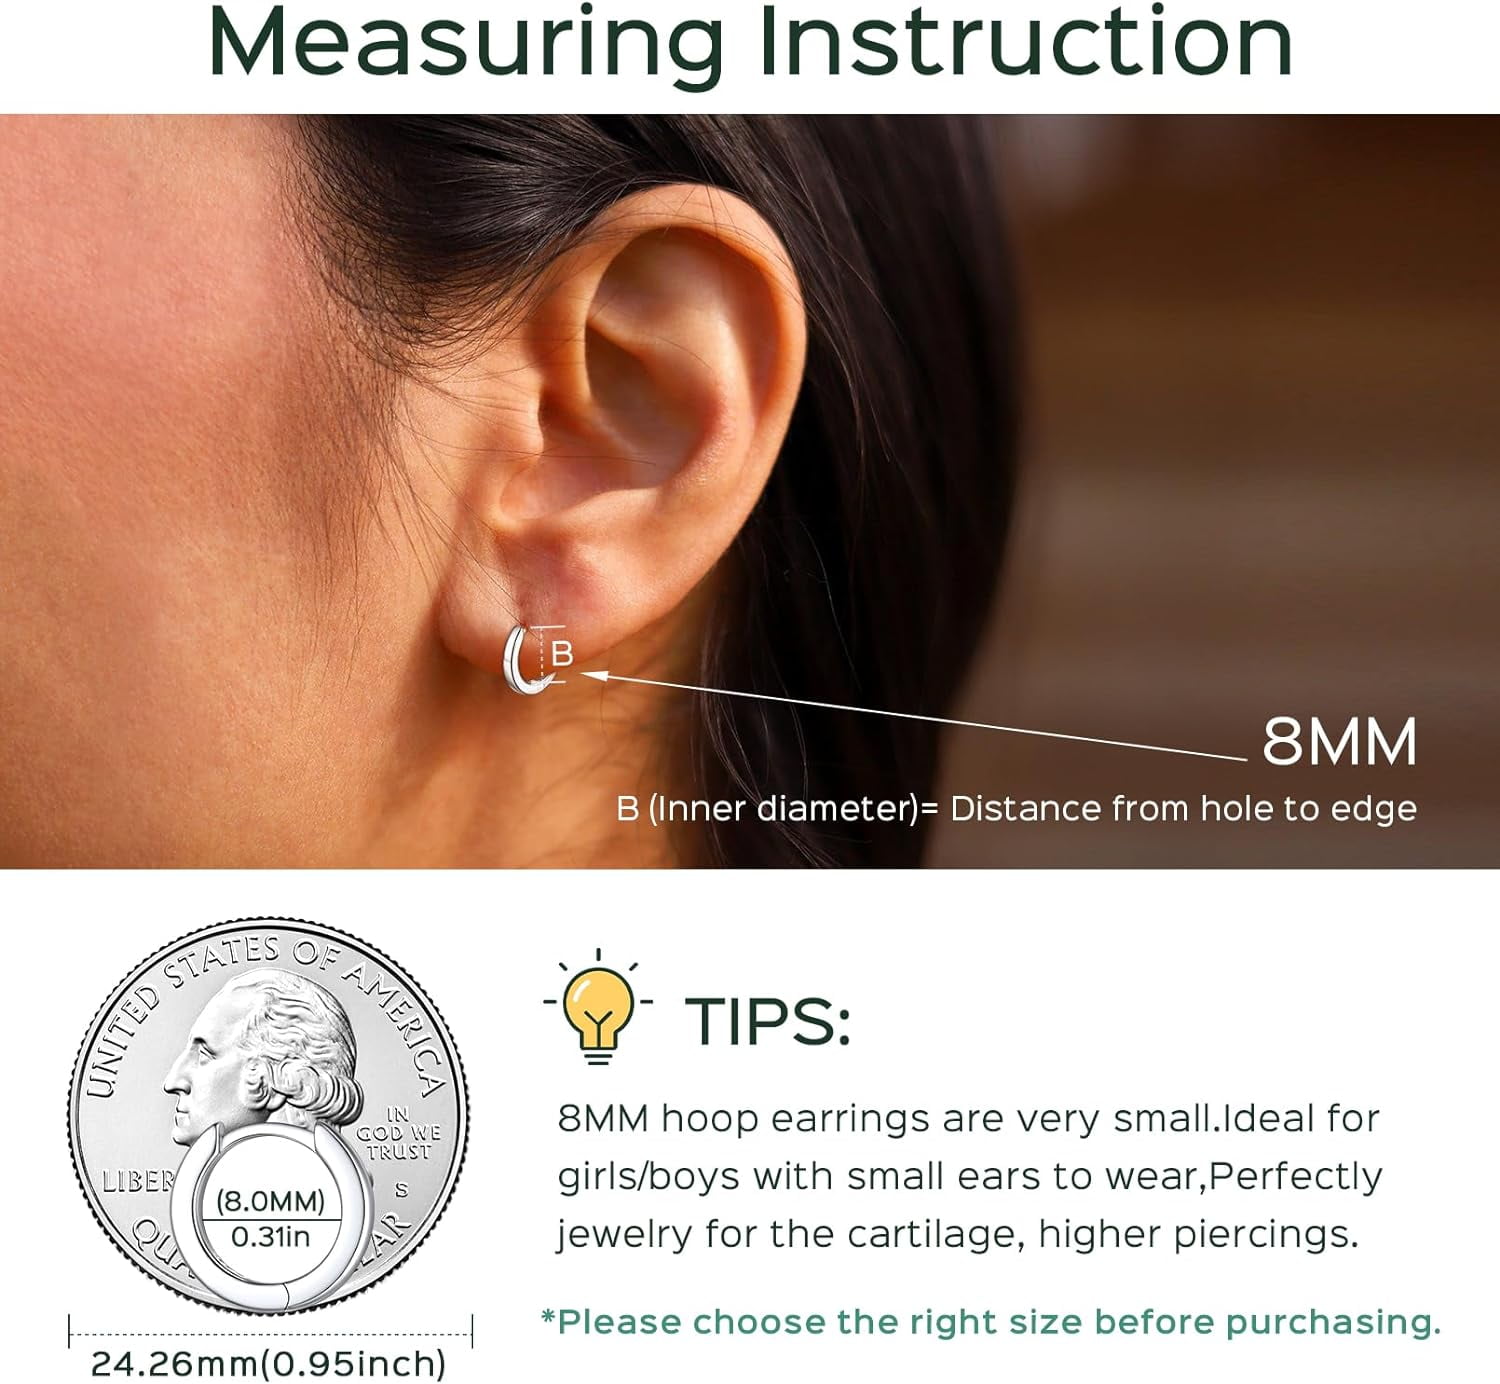 TIPS FOR INSERTING TINY CONTINUOUS/ENDLESS HOOP EARRINGS! - YouTube